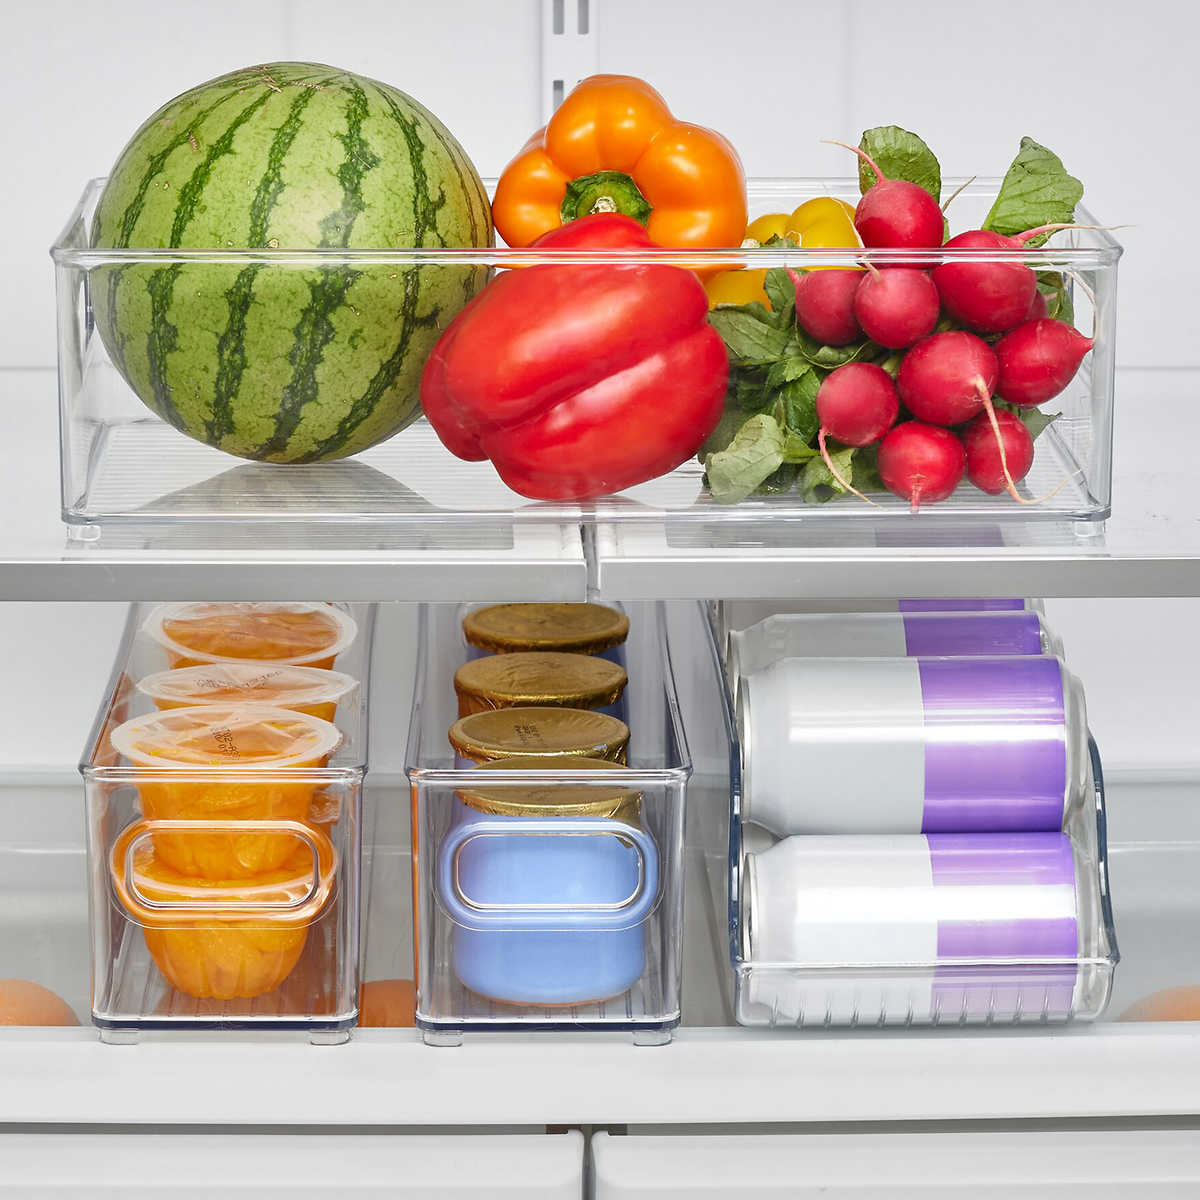 The Complete Sanitary Drying Rack for Healthcare Kitchens - the CAMBRO blog